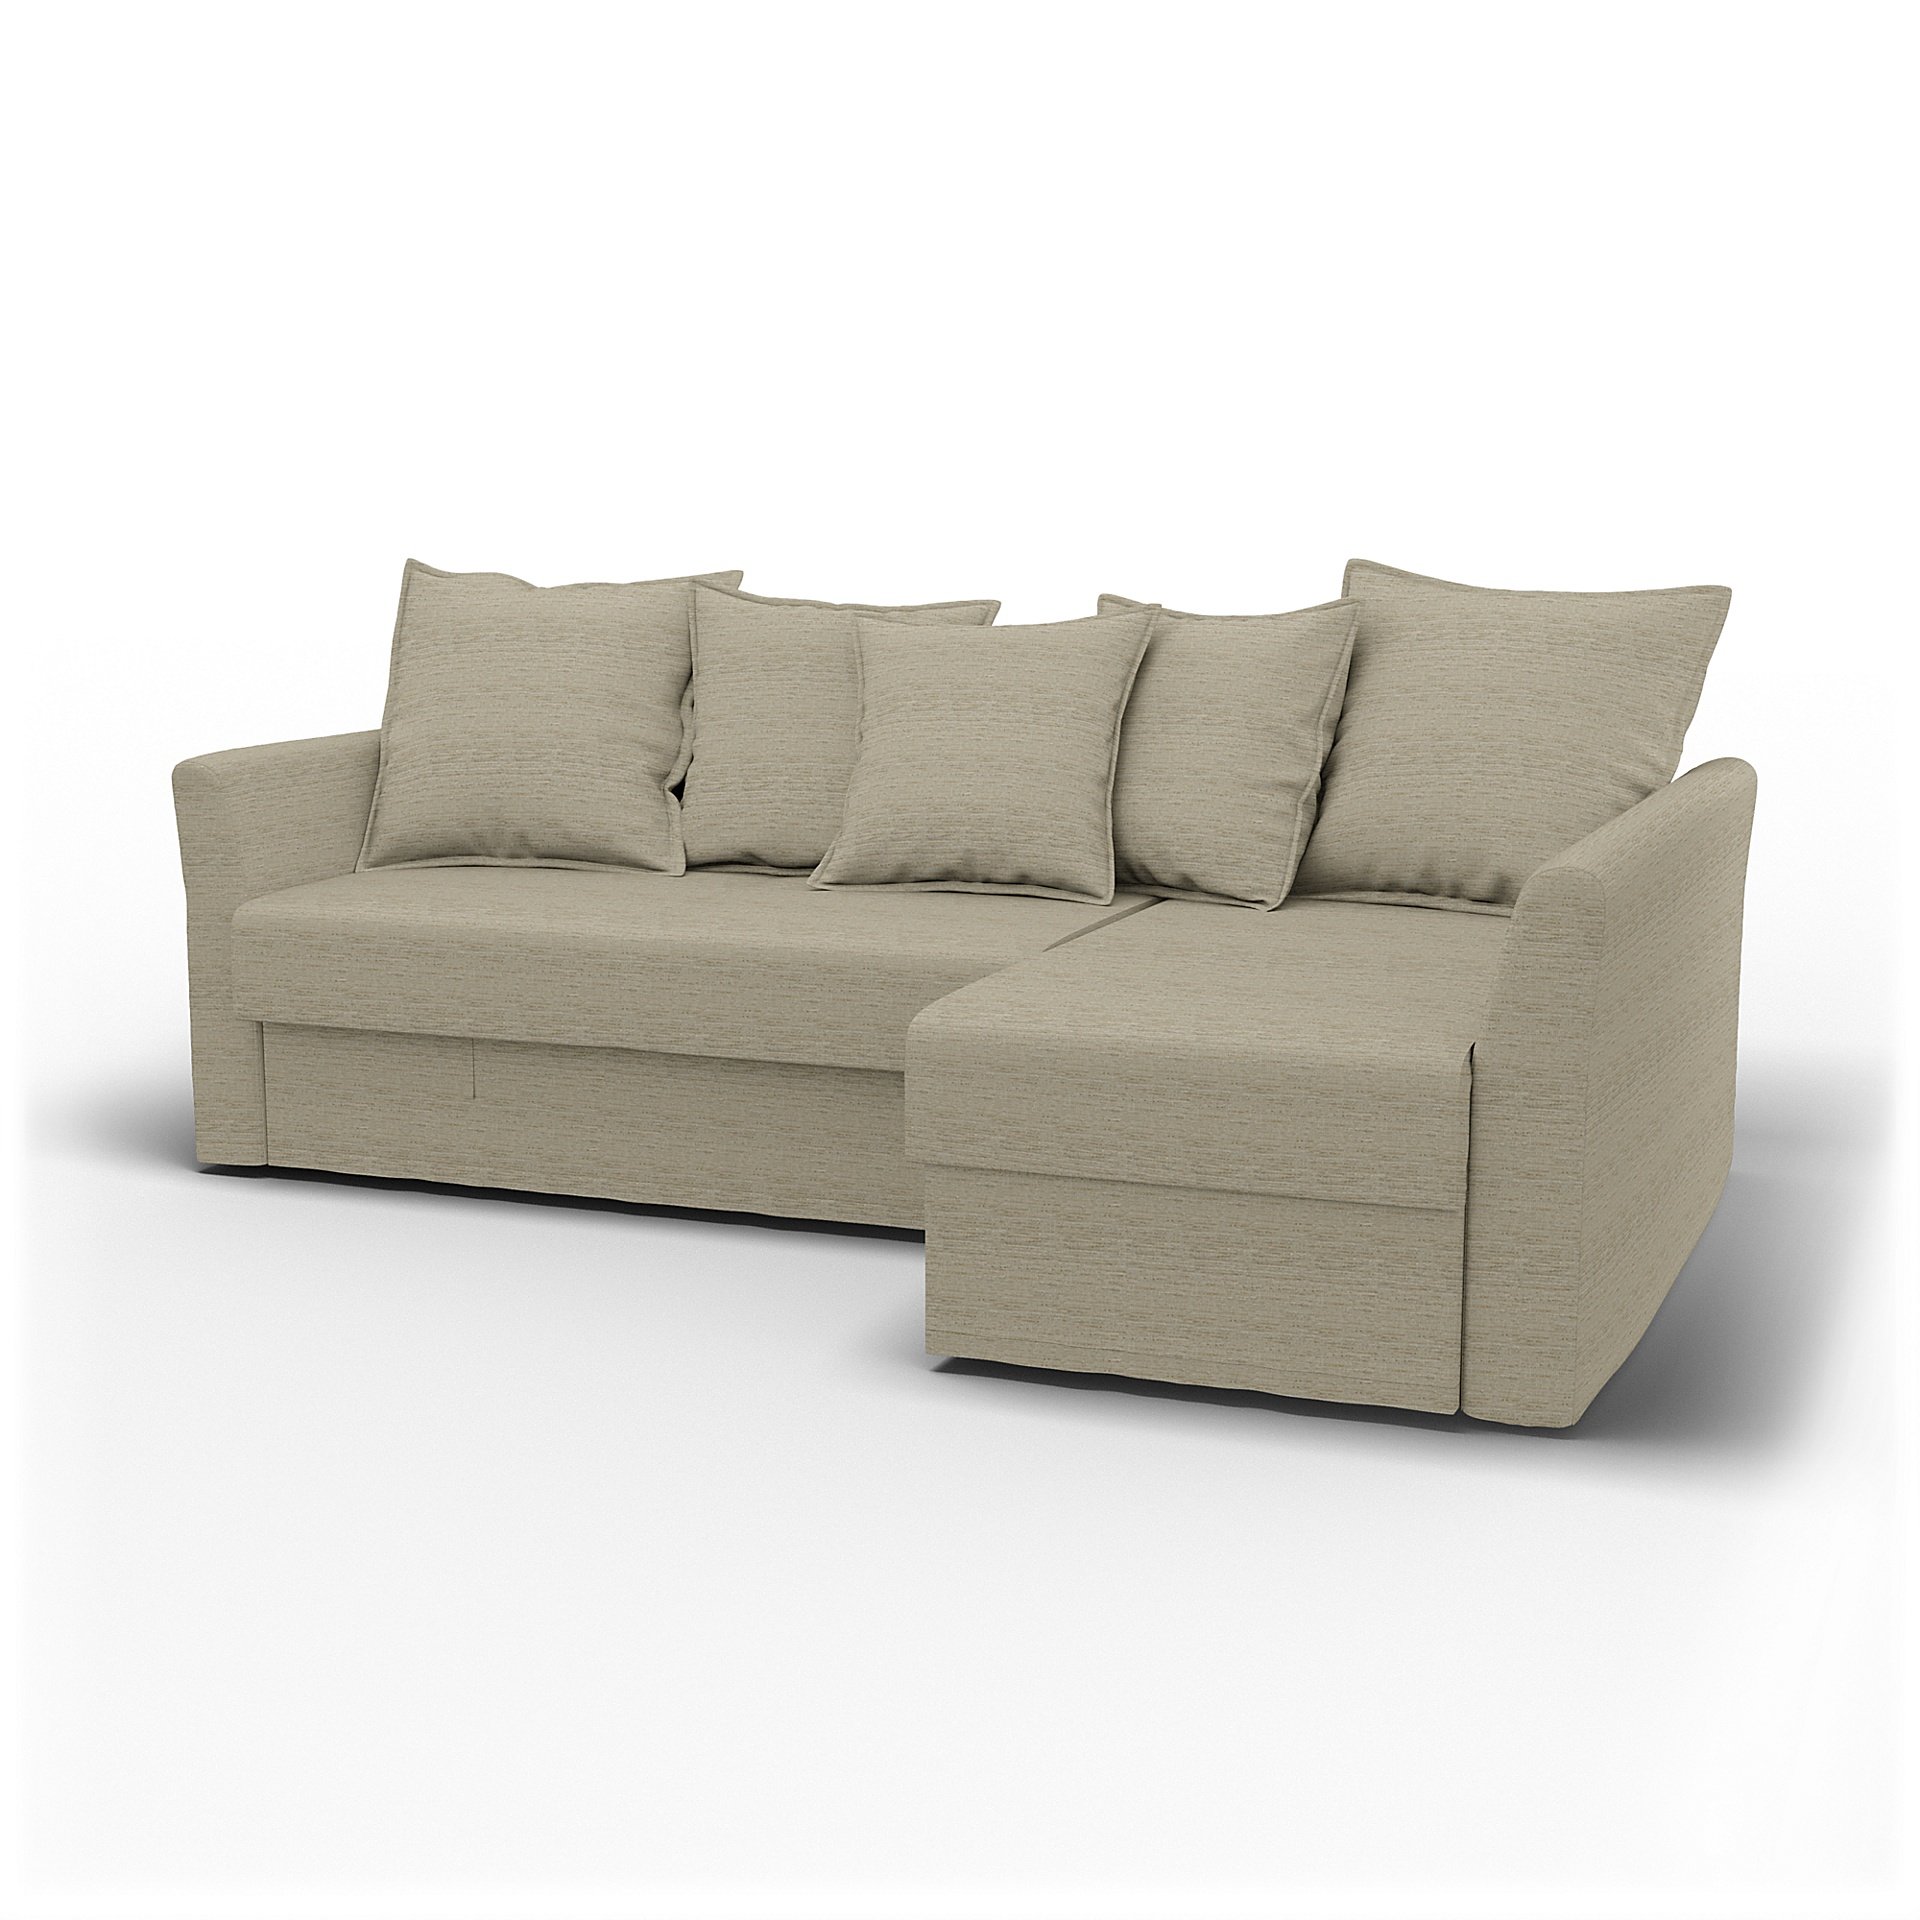 IKEA - Holmsund Sofabed with Chaiselongue, Light Sand, Boucle & Texture - Bemz